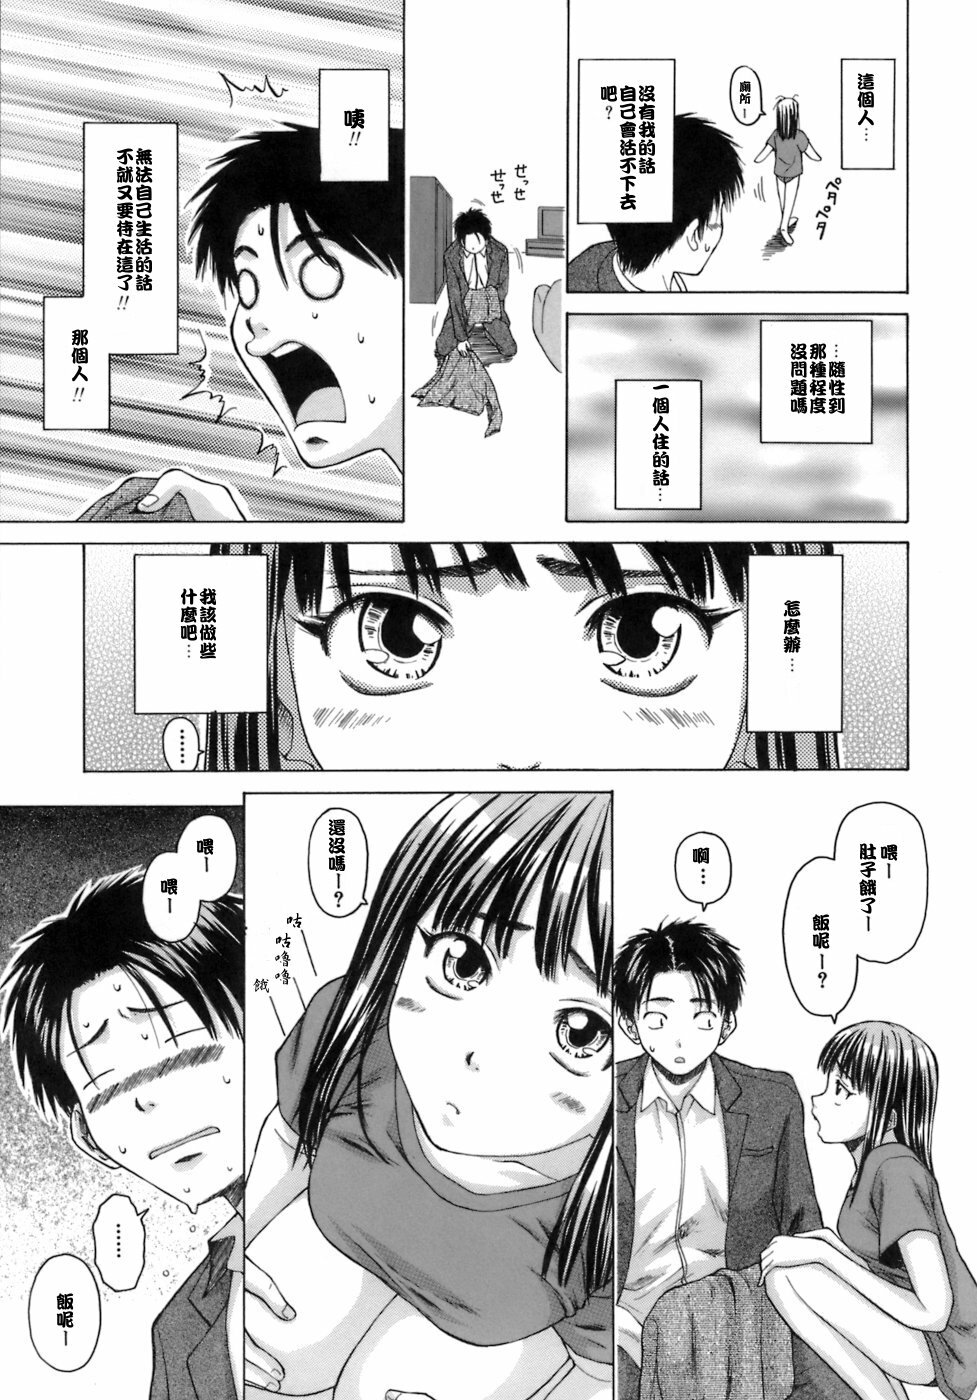 [Fuuga] Kyoushi to Seito to - Teacher and Student [Chinese] [悠月工房] page 48 full